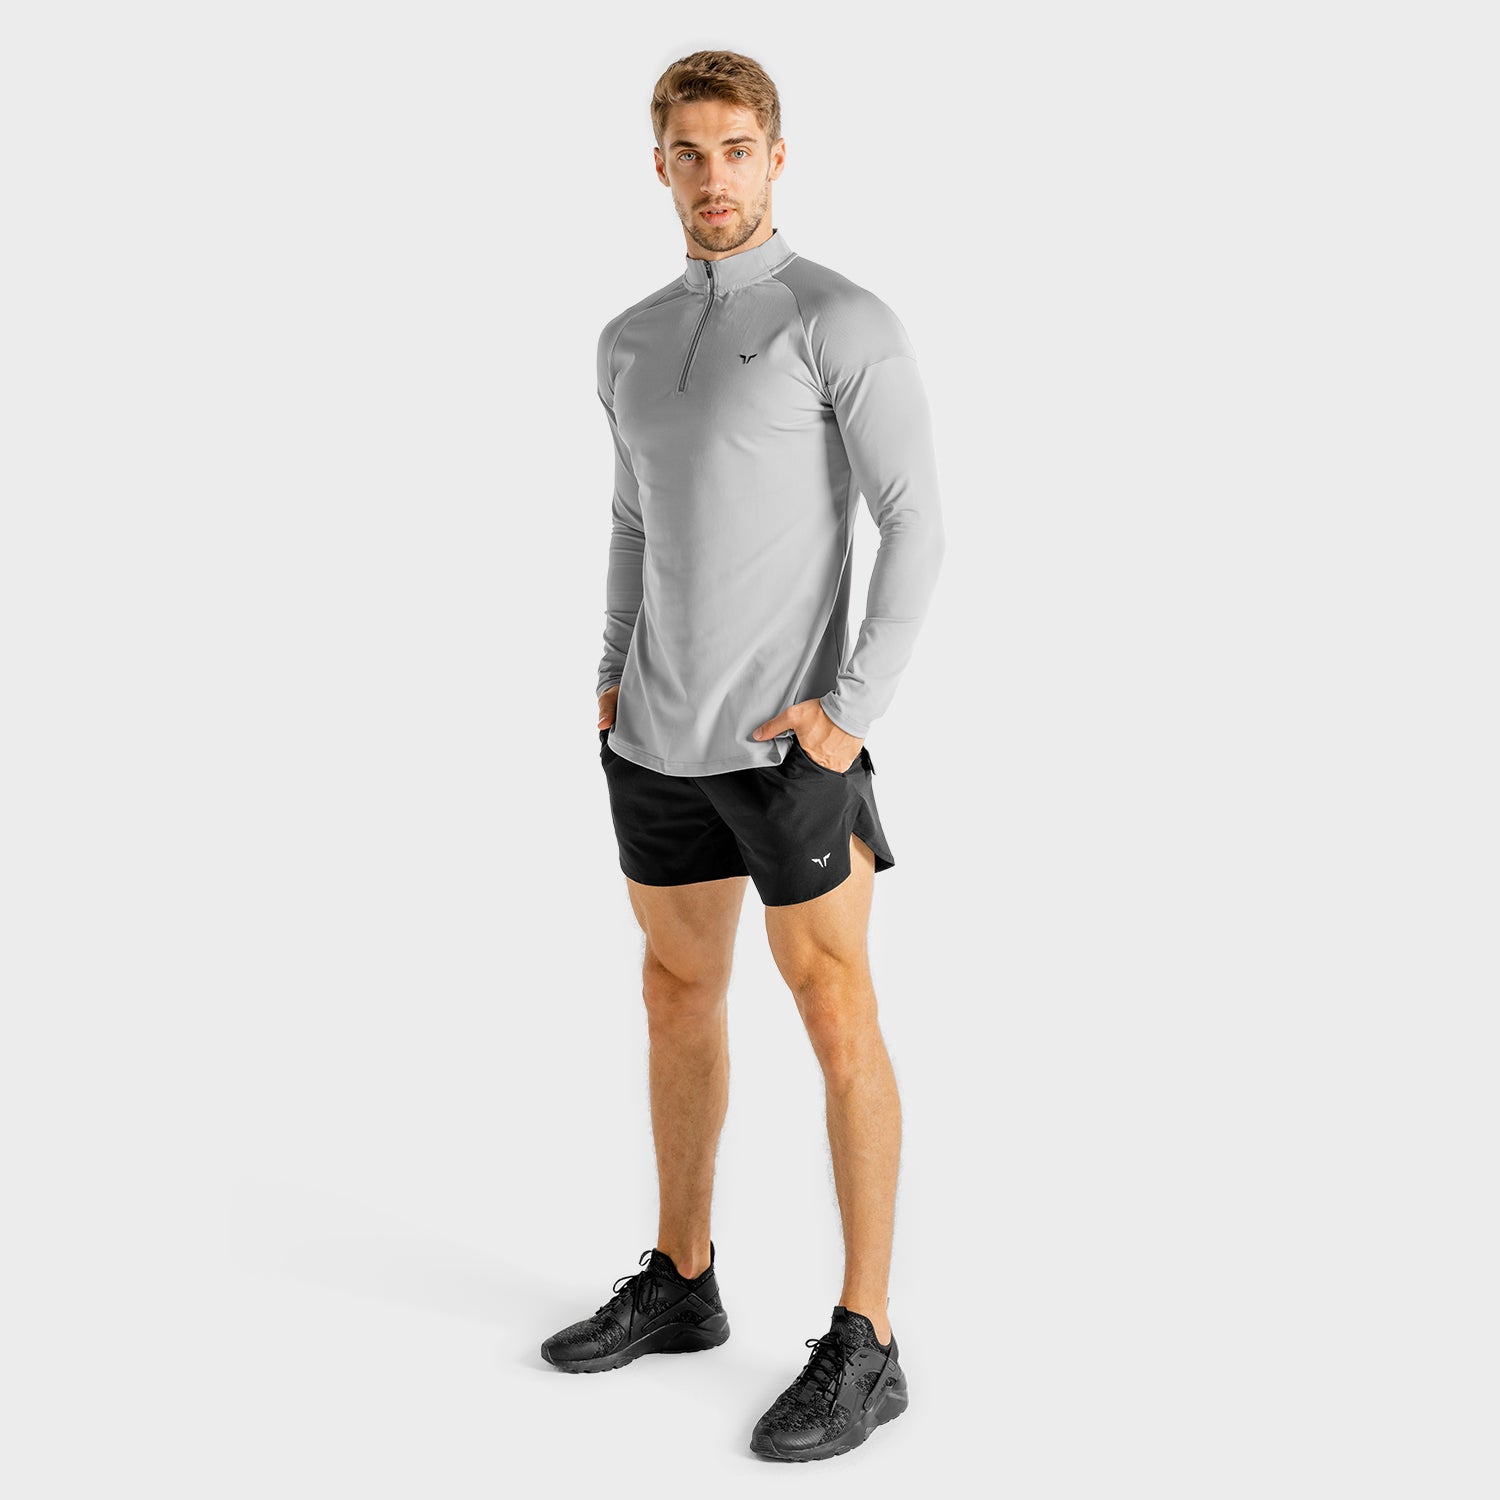 squatwolf-workout-shirts-for-men-core-running-top-grey-long-sleeve-gym-wear